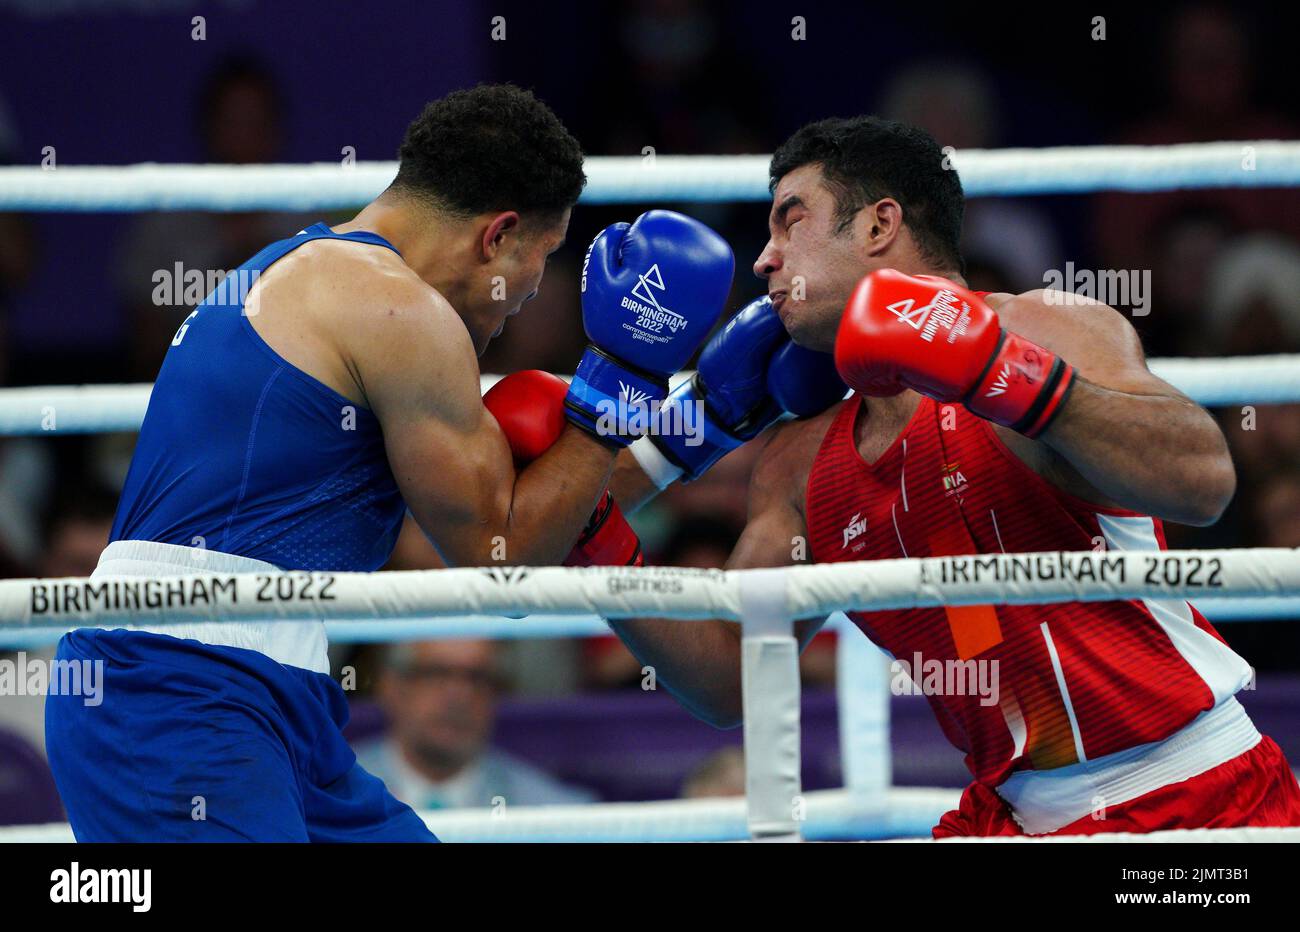 England's Delicious Orie (left) in action against India's Sagar Sagar during the Men's Super Heavy (+92kg) Final at The NEC on day ten of the 2022 Commonwealth Games in Birmingham. Picture date: Sunday August 7, 2022. Stock Photo